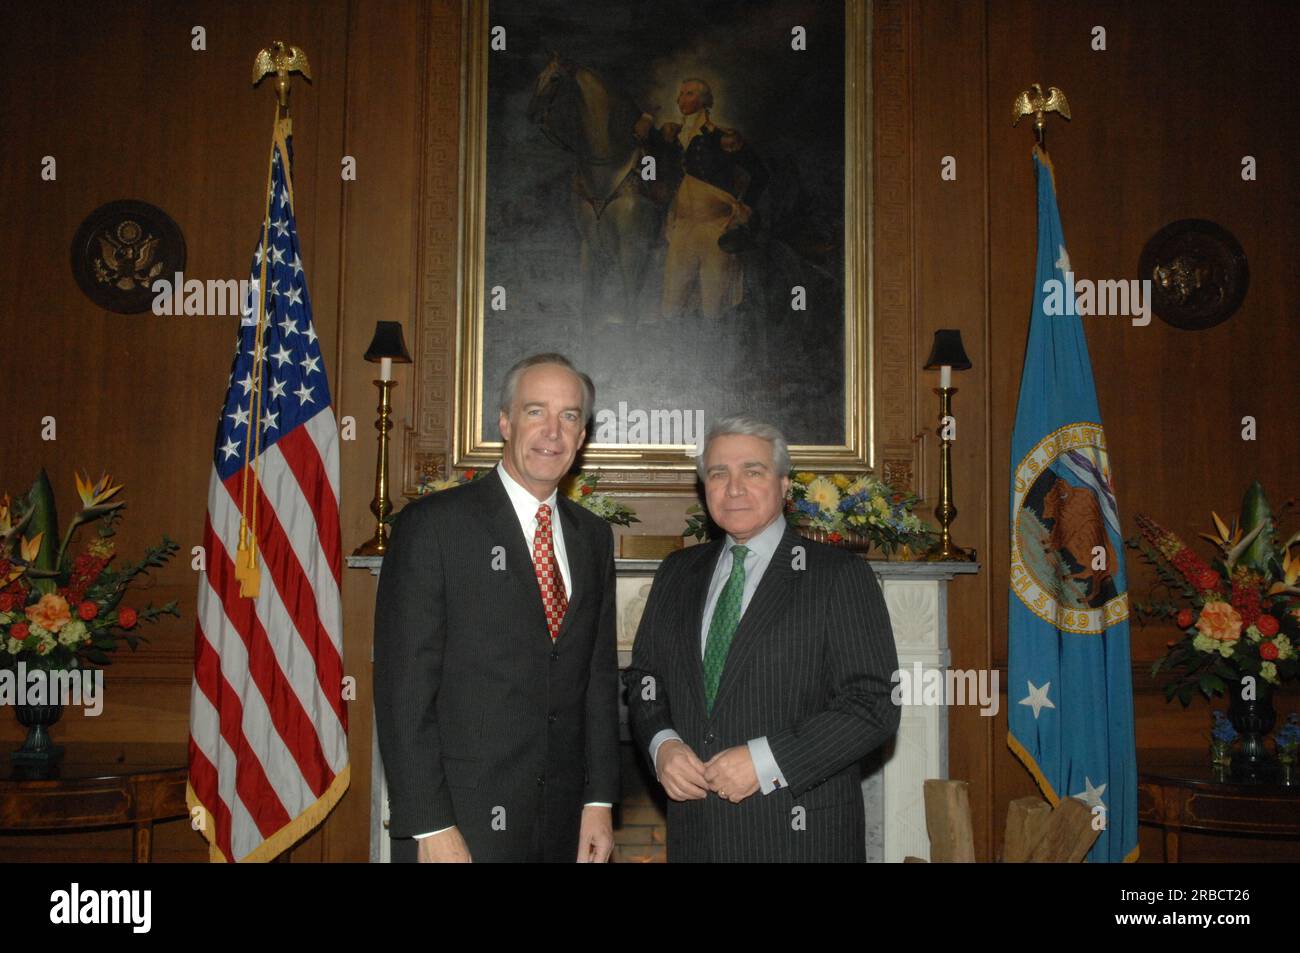 Secretary Dirk Kempthorne receiving visit at Main Interior from Philip Lader, head of the global media and comunications firm, WPP Group, and former U.S. Ambassador to the United Kingdom, as well as former Administrator of the Small Business Administration Stock Photo